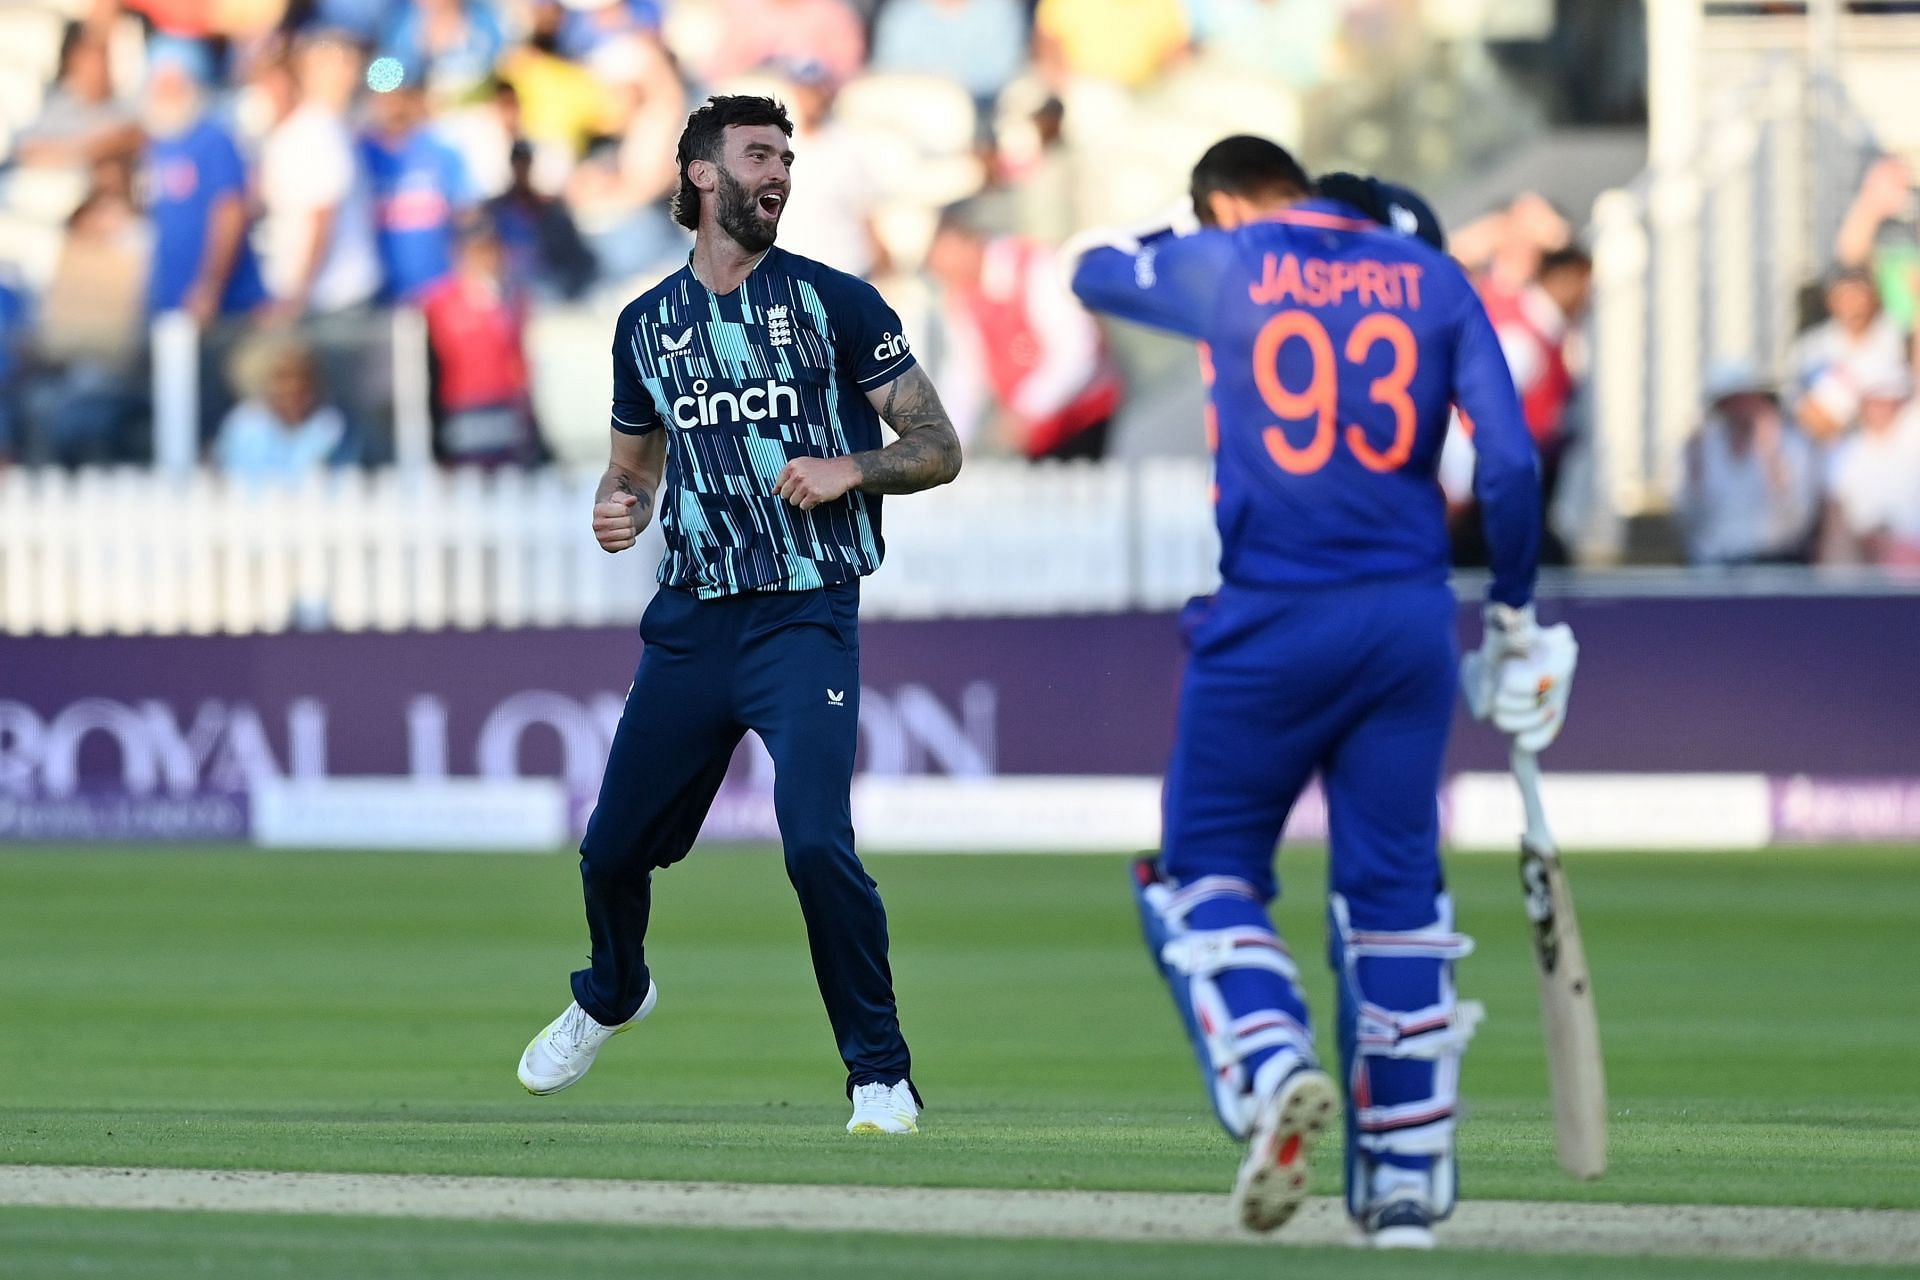 India and England are currently involved in a one-day series. Pic: Getty Images